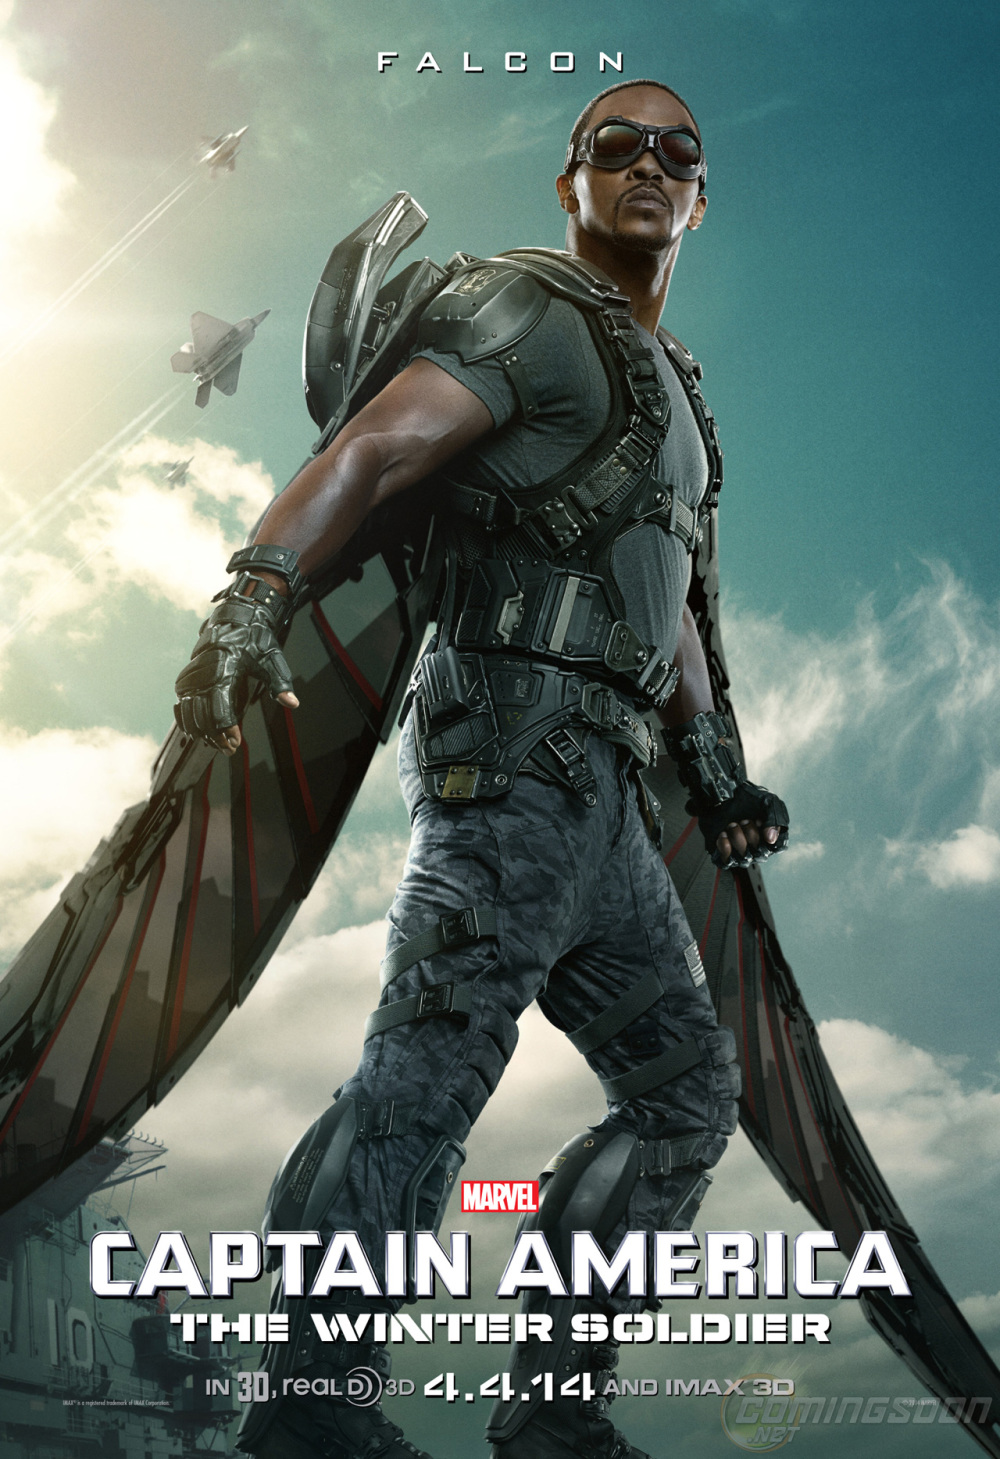 Anthony Mackie's The Falcon prijkt op poster 'Captain America: The Winter Soldier'